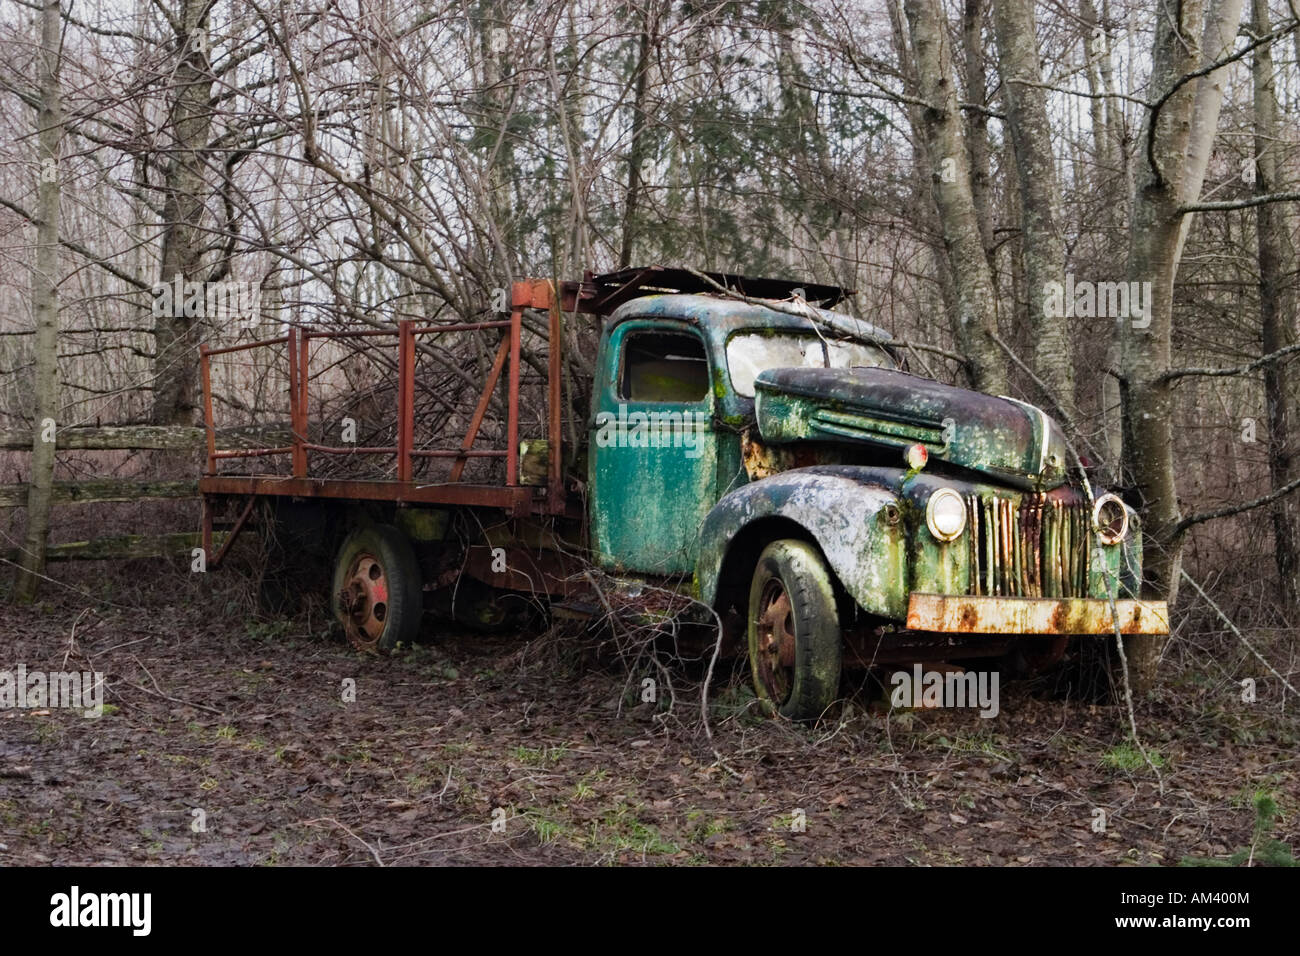 Abandoned Old Green Truck In Forest Stock Photo